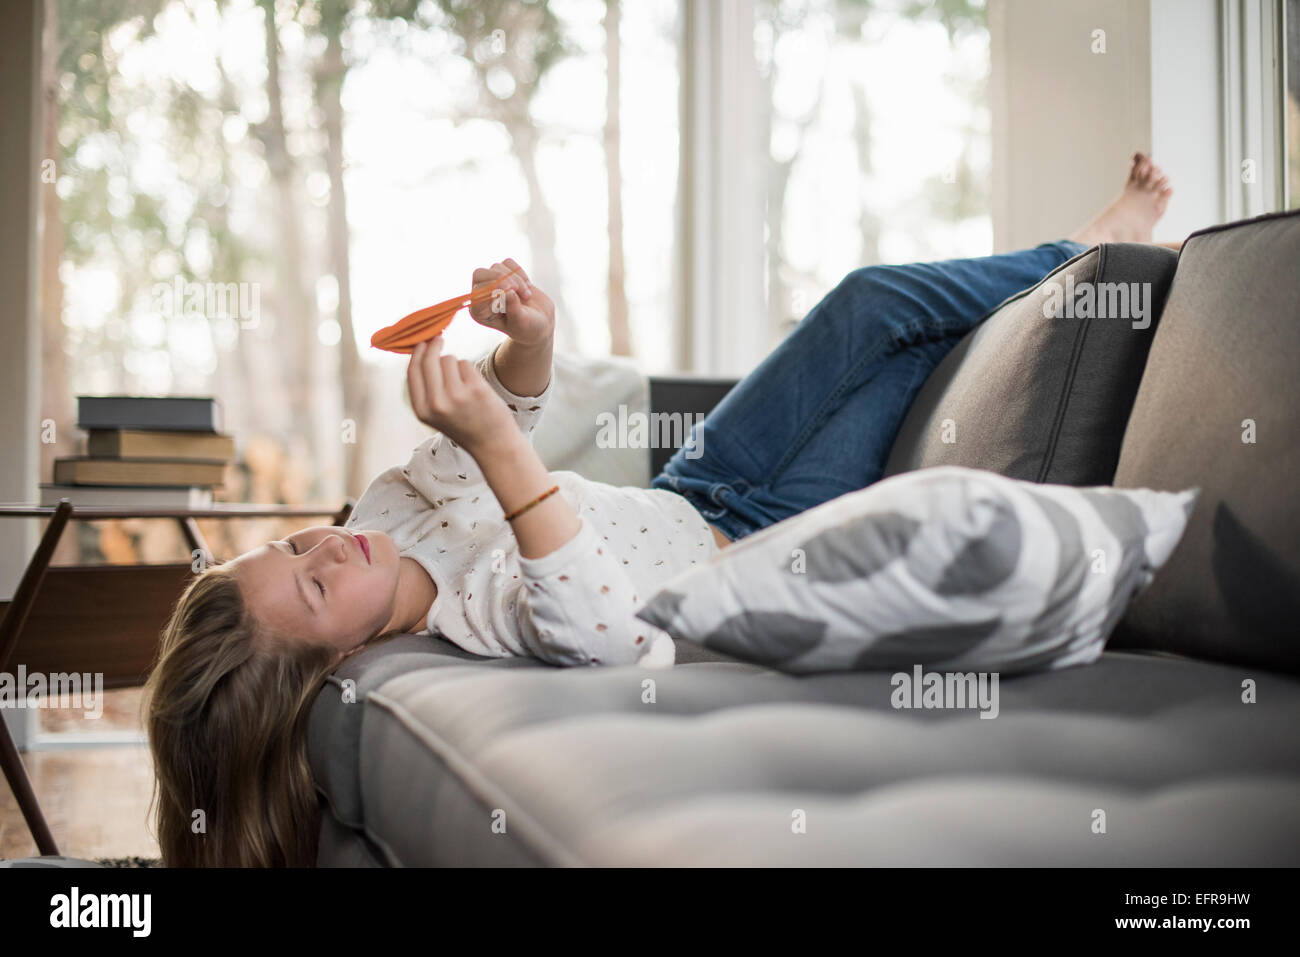 Girl lying on a sofa on her back, holding a paper bird. Stock Photo